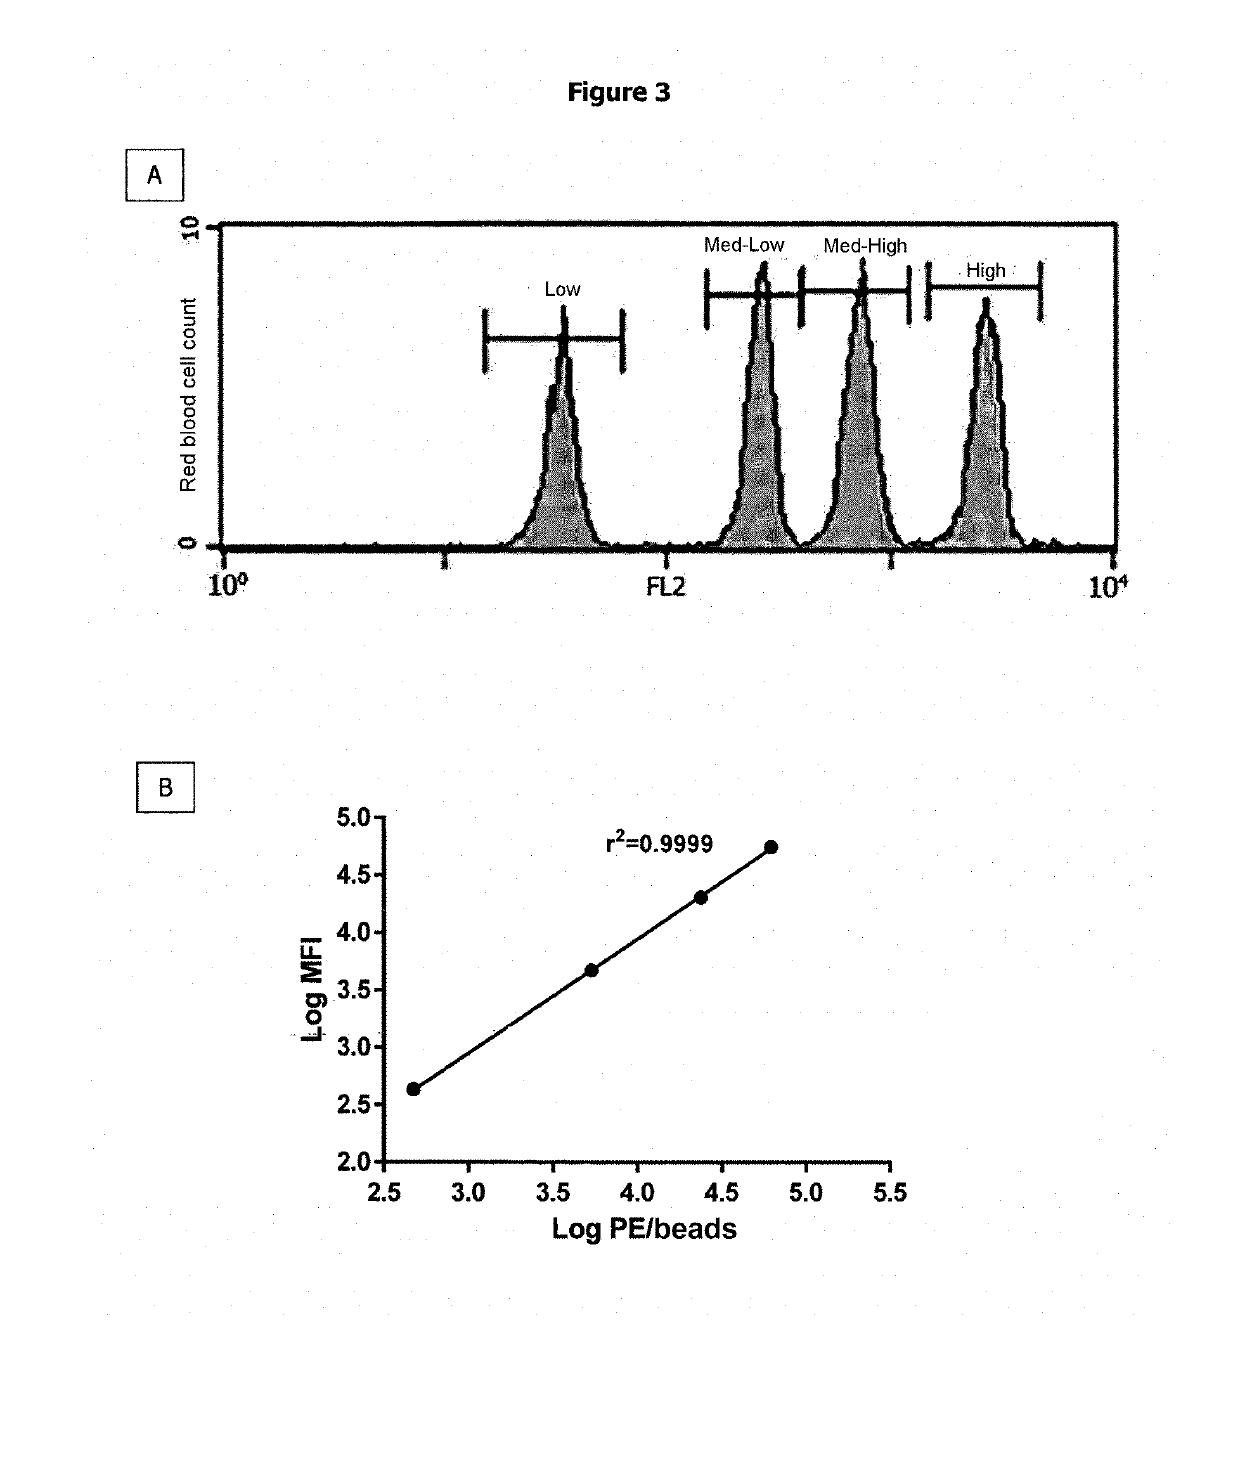 Method for Determining the Haemoglobin F Content of an Erythroid Cell